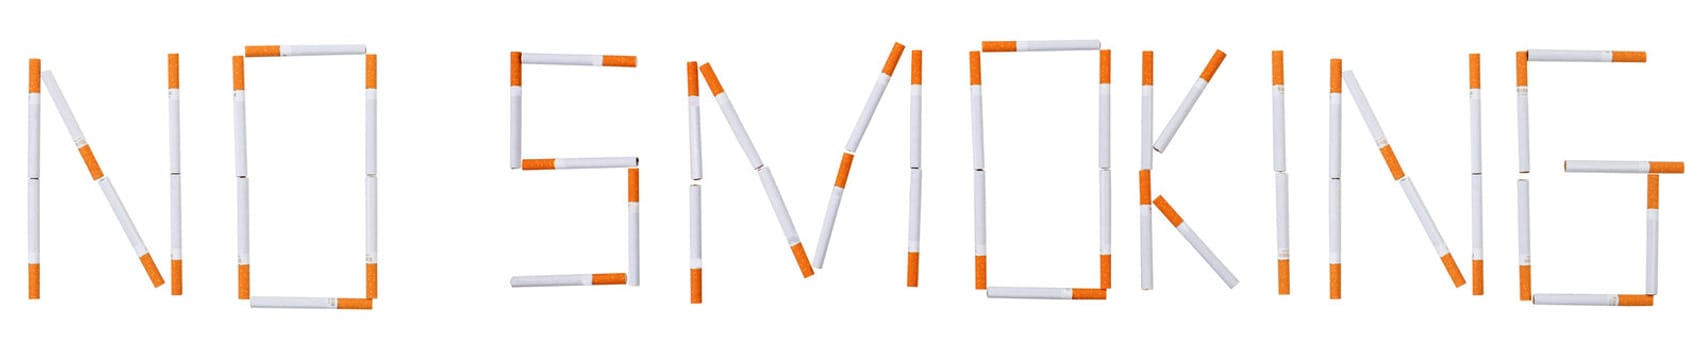 The word take out of cigarettes on the white background - no smoking